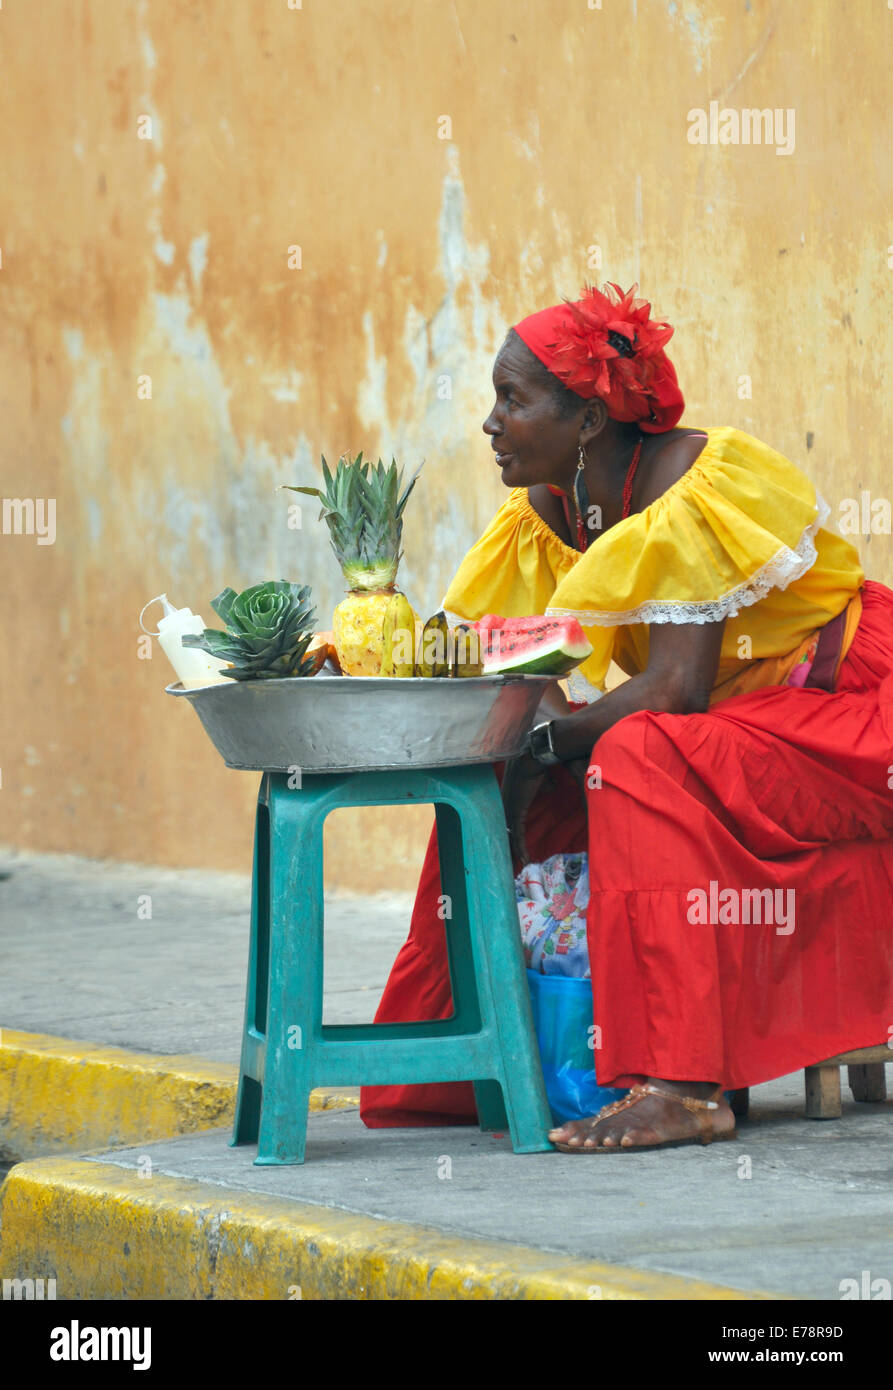 CARTAGENA, MAY 13: Palenquera woman with typical dress sells fruit on the Street on May 13, 2010 in Cartagena, Colombia. Palenqu Stock Photo